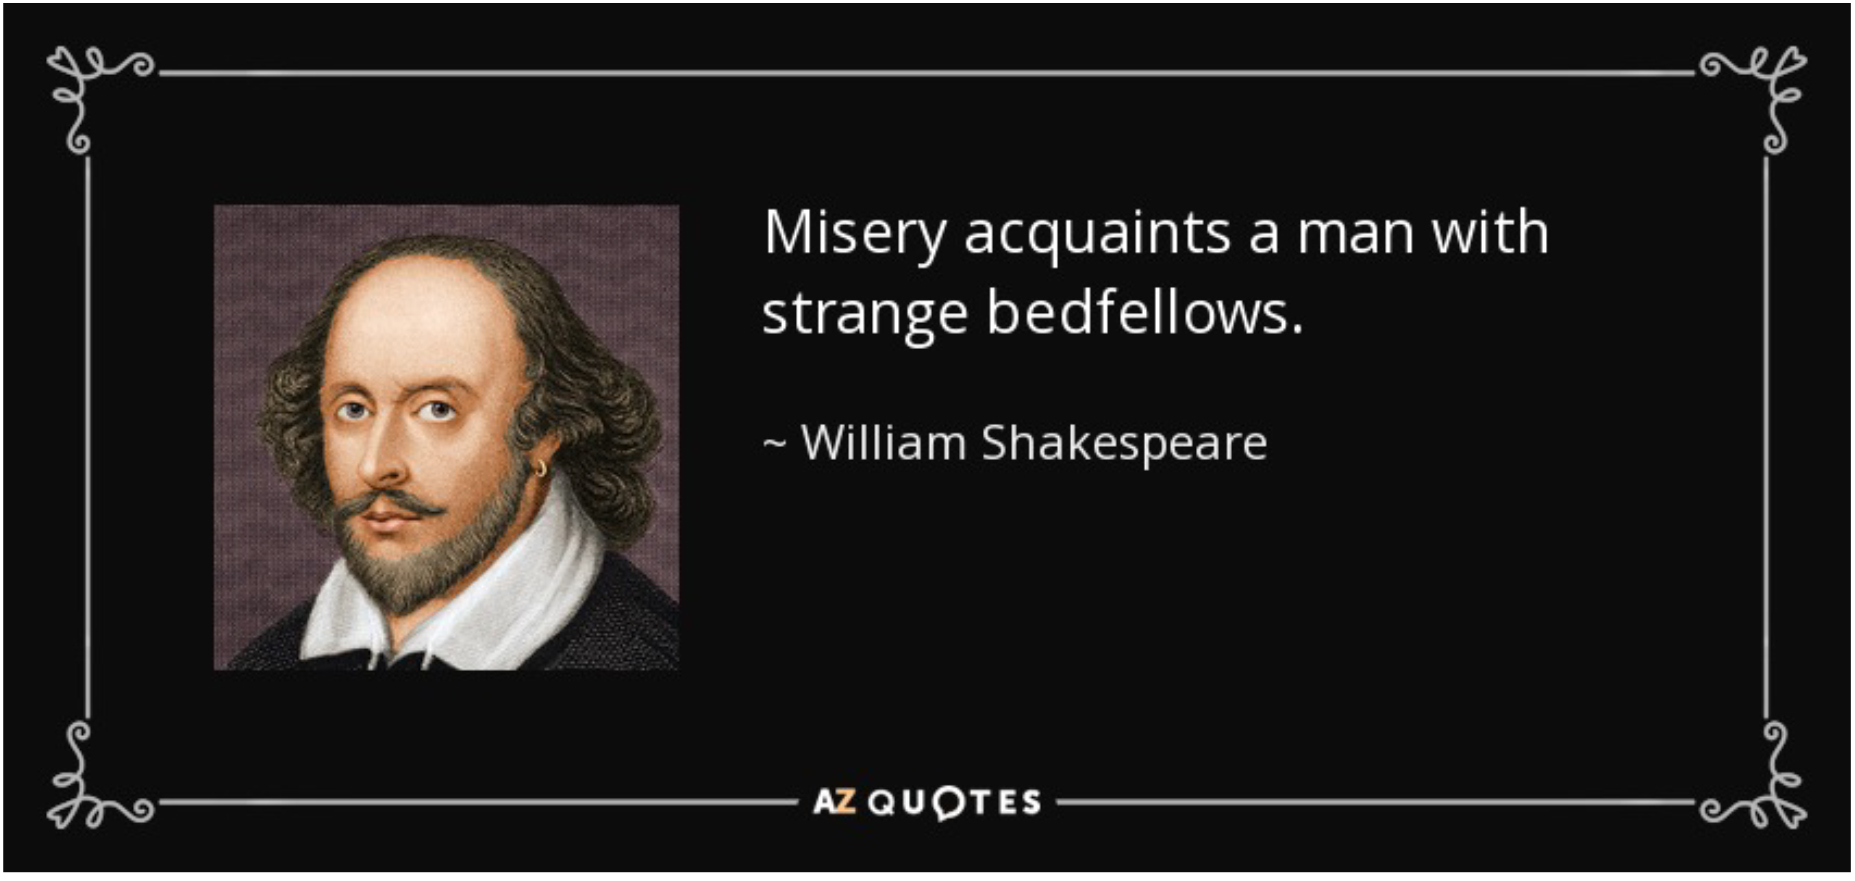 Shakespeare Quote Image